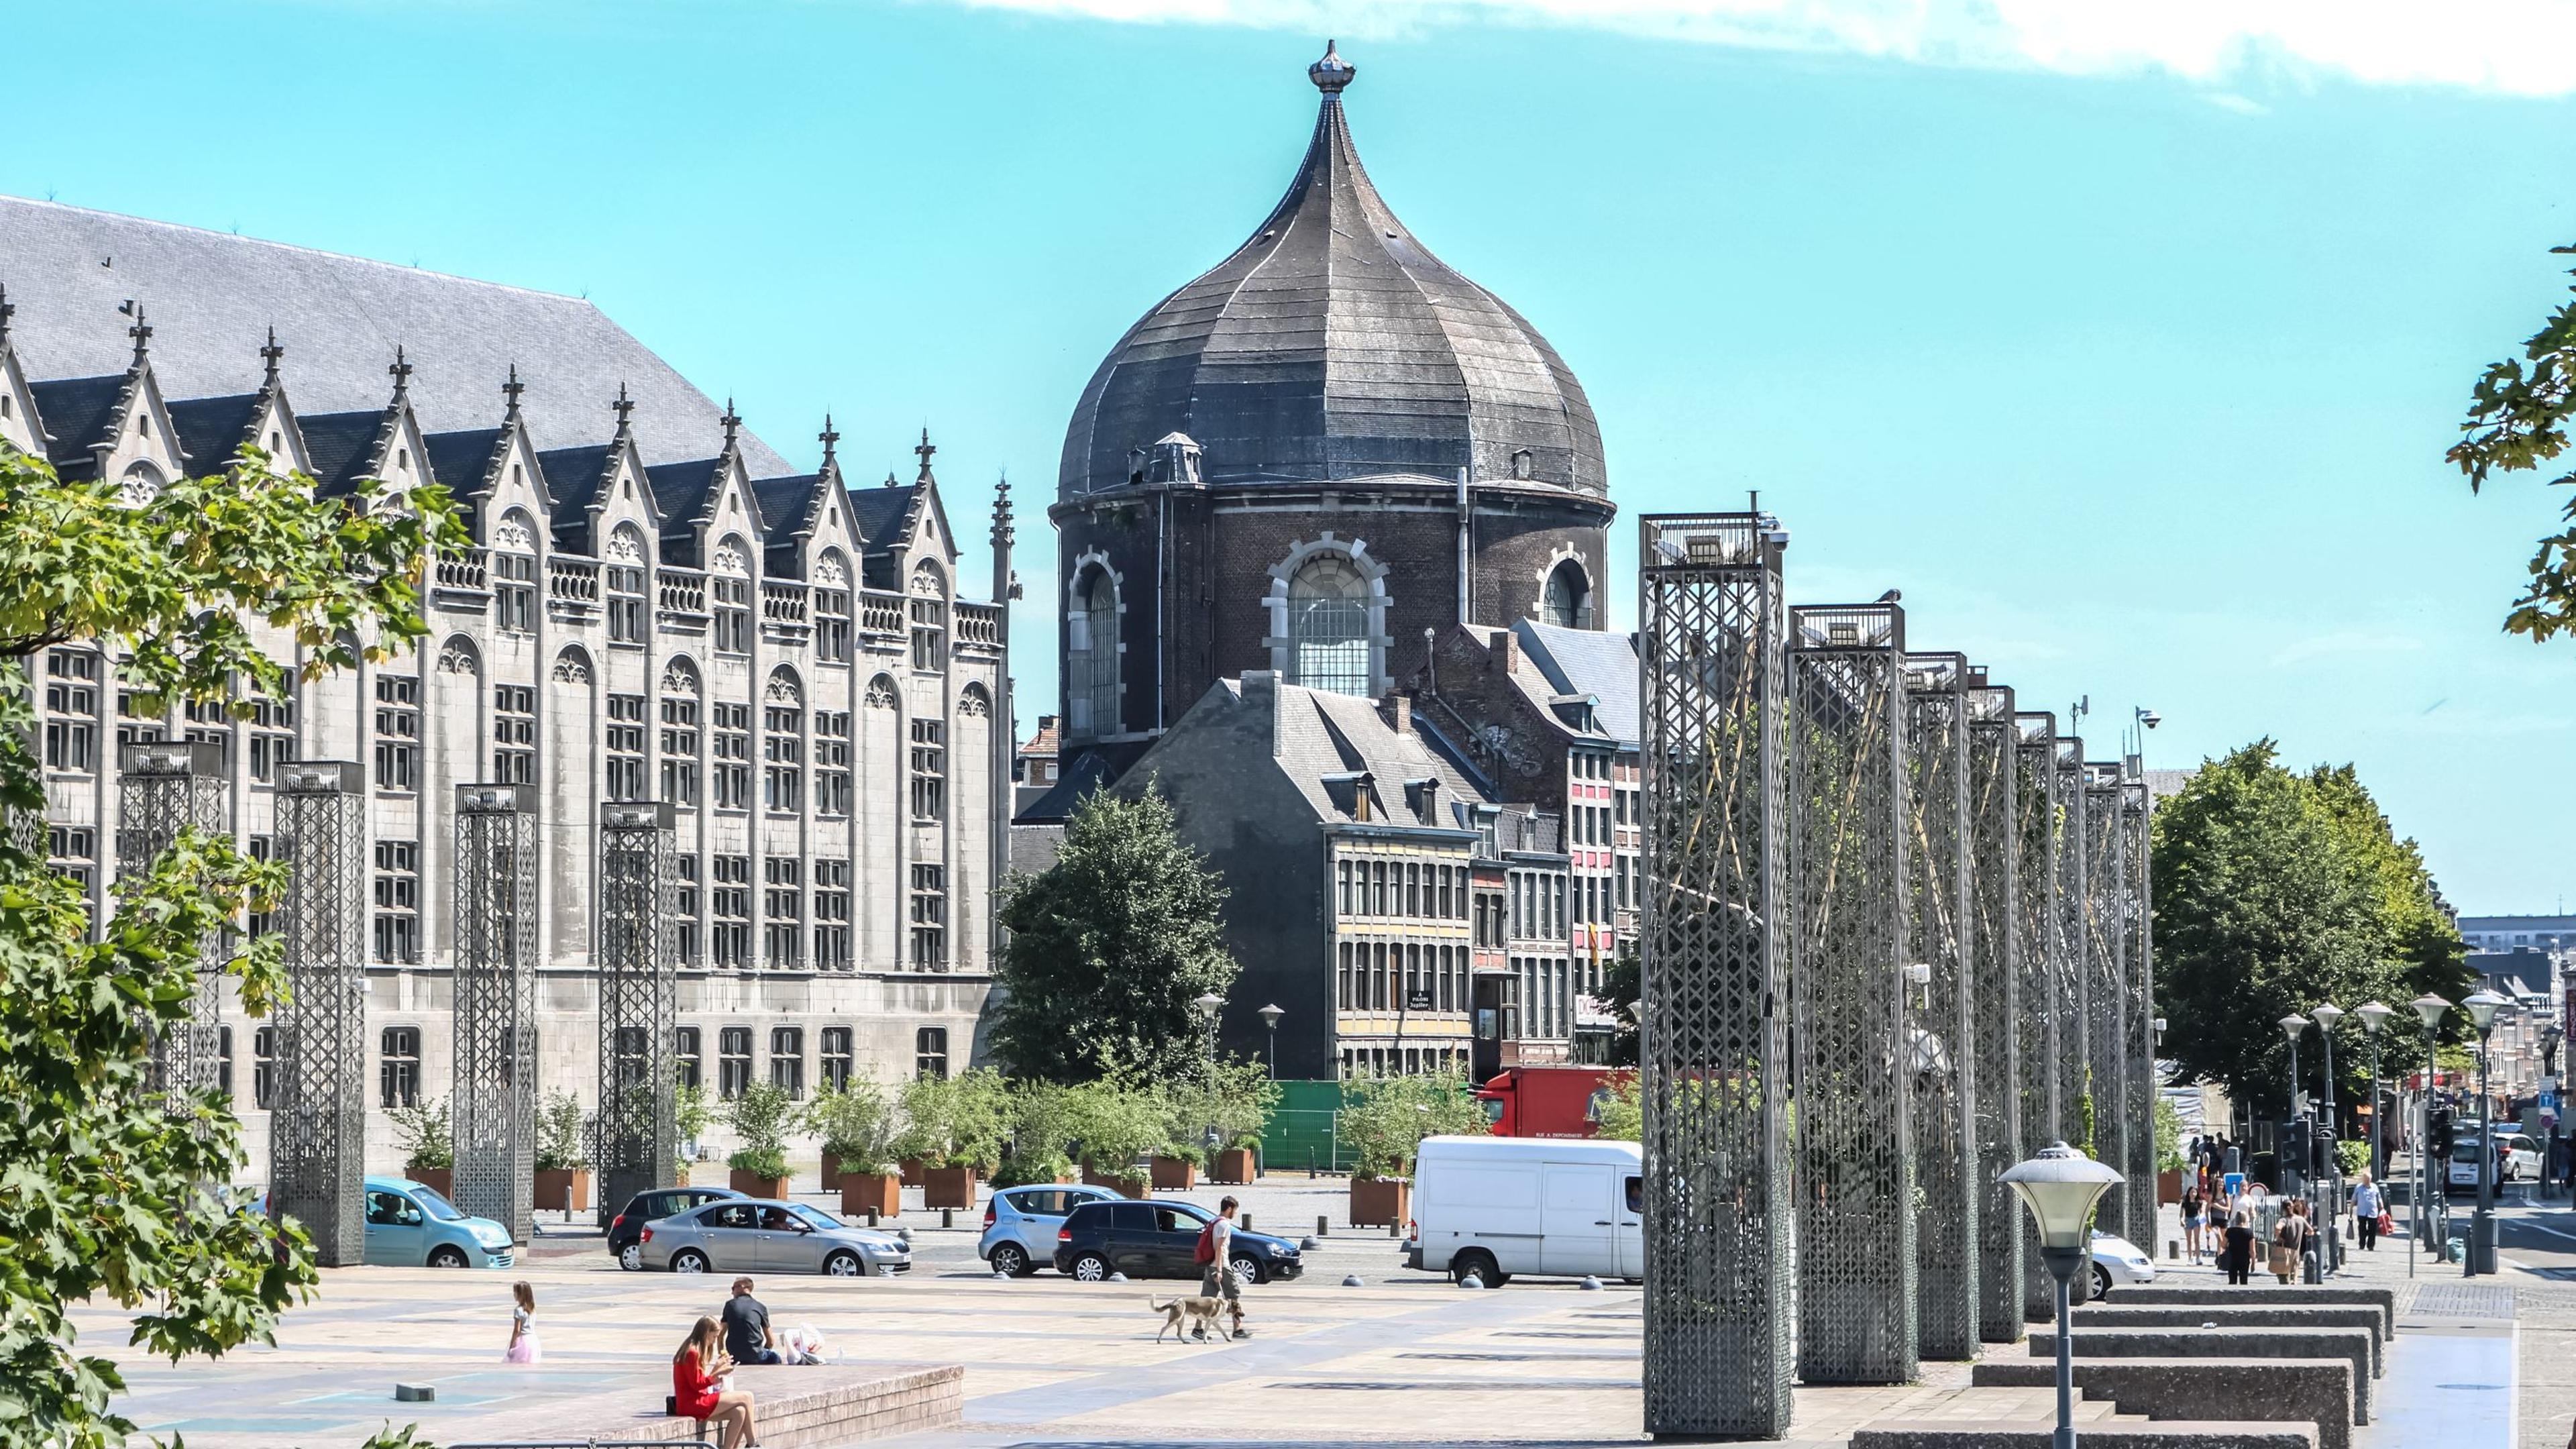 There are some architectural wonders in Liege